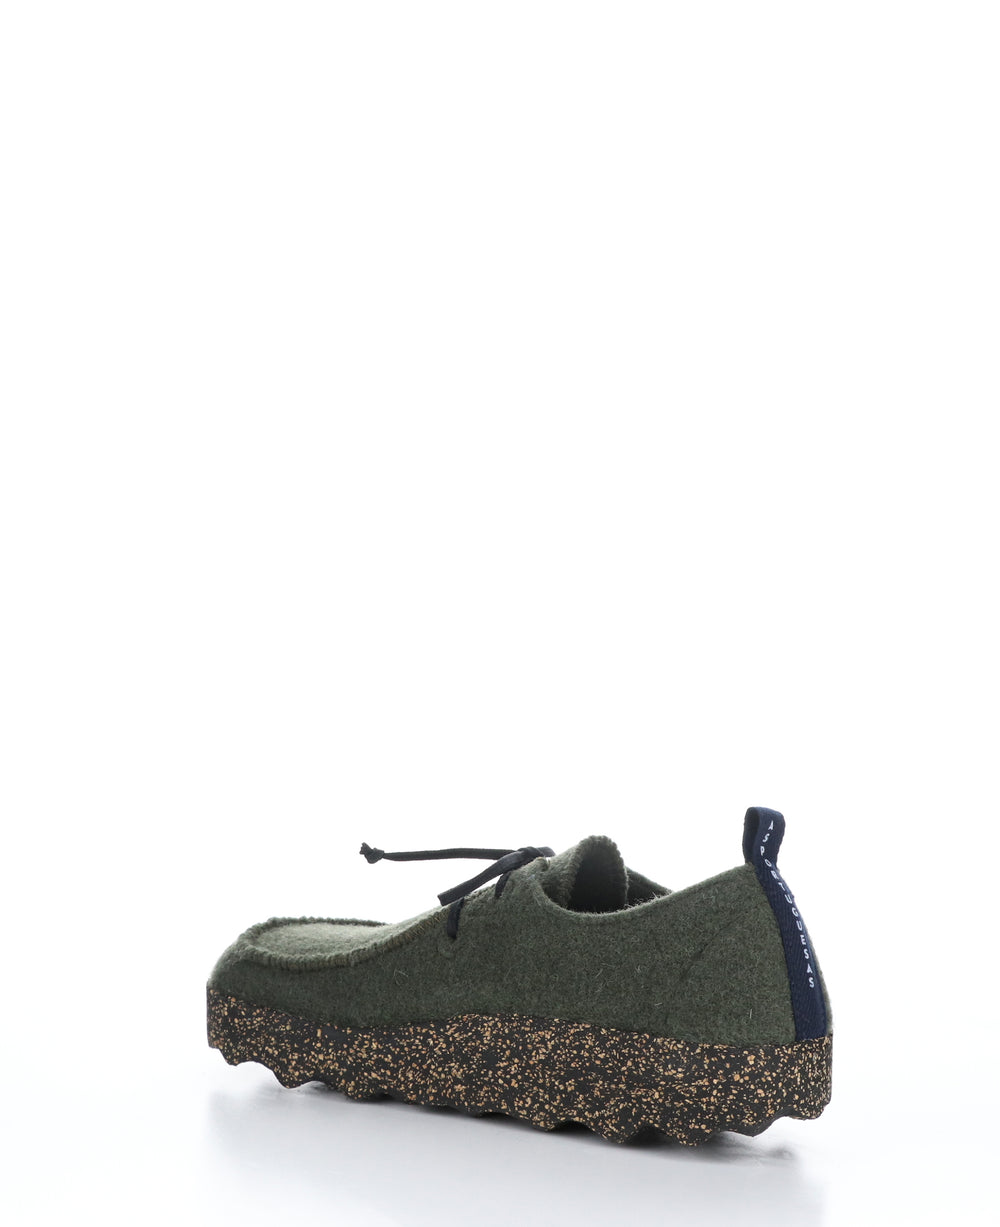 CHAT060ASPM Military Green Round Toe Shoes